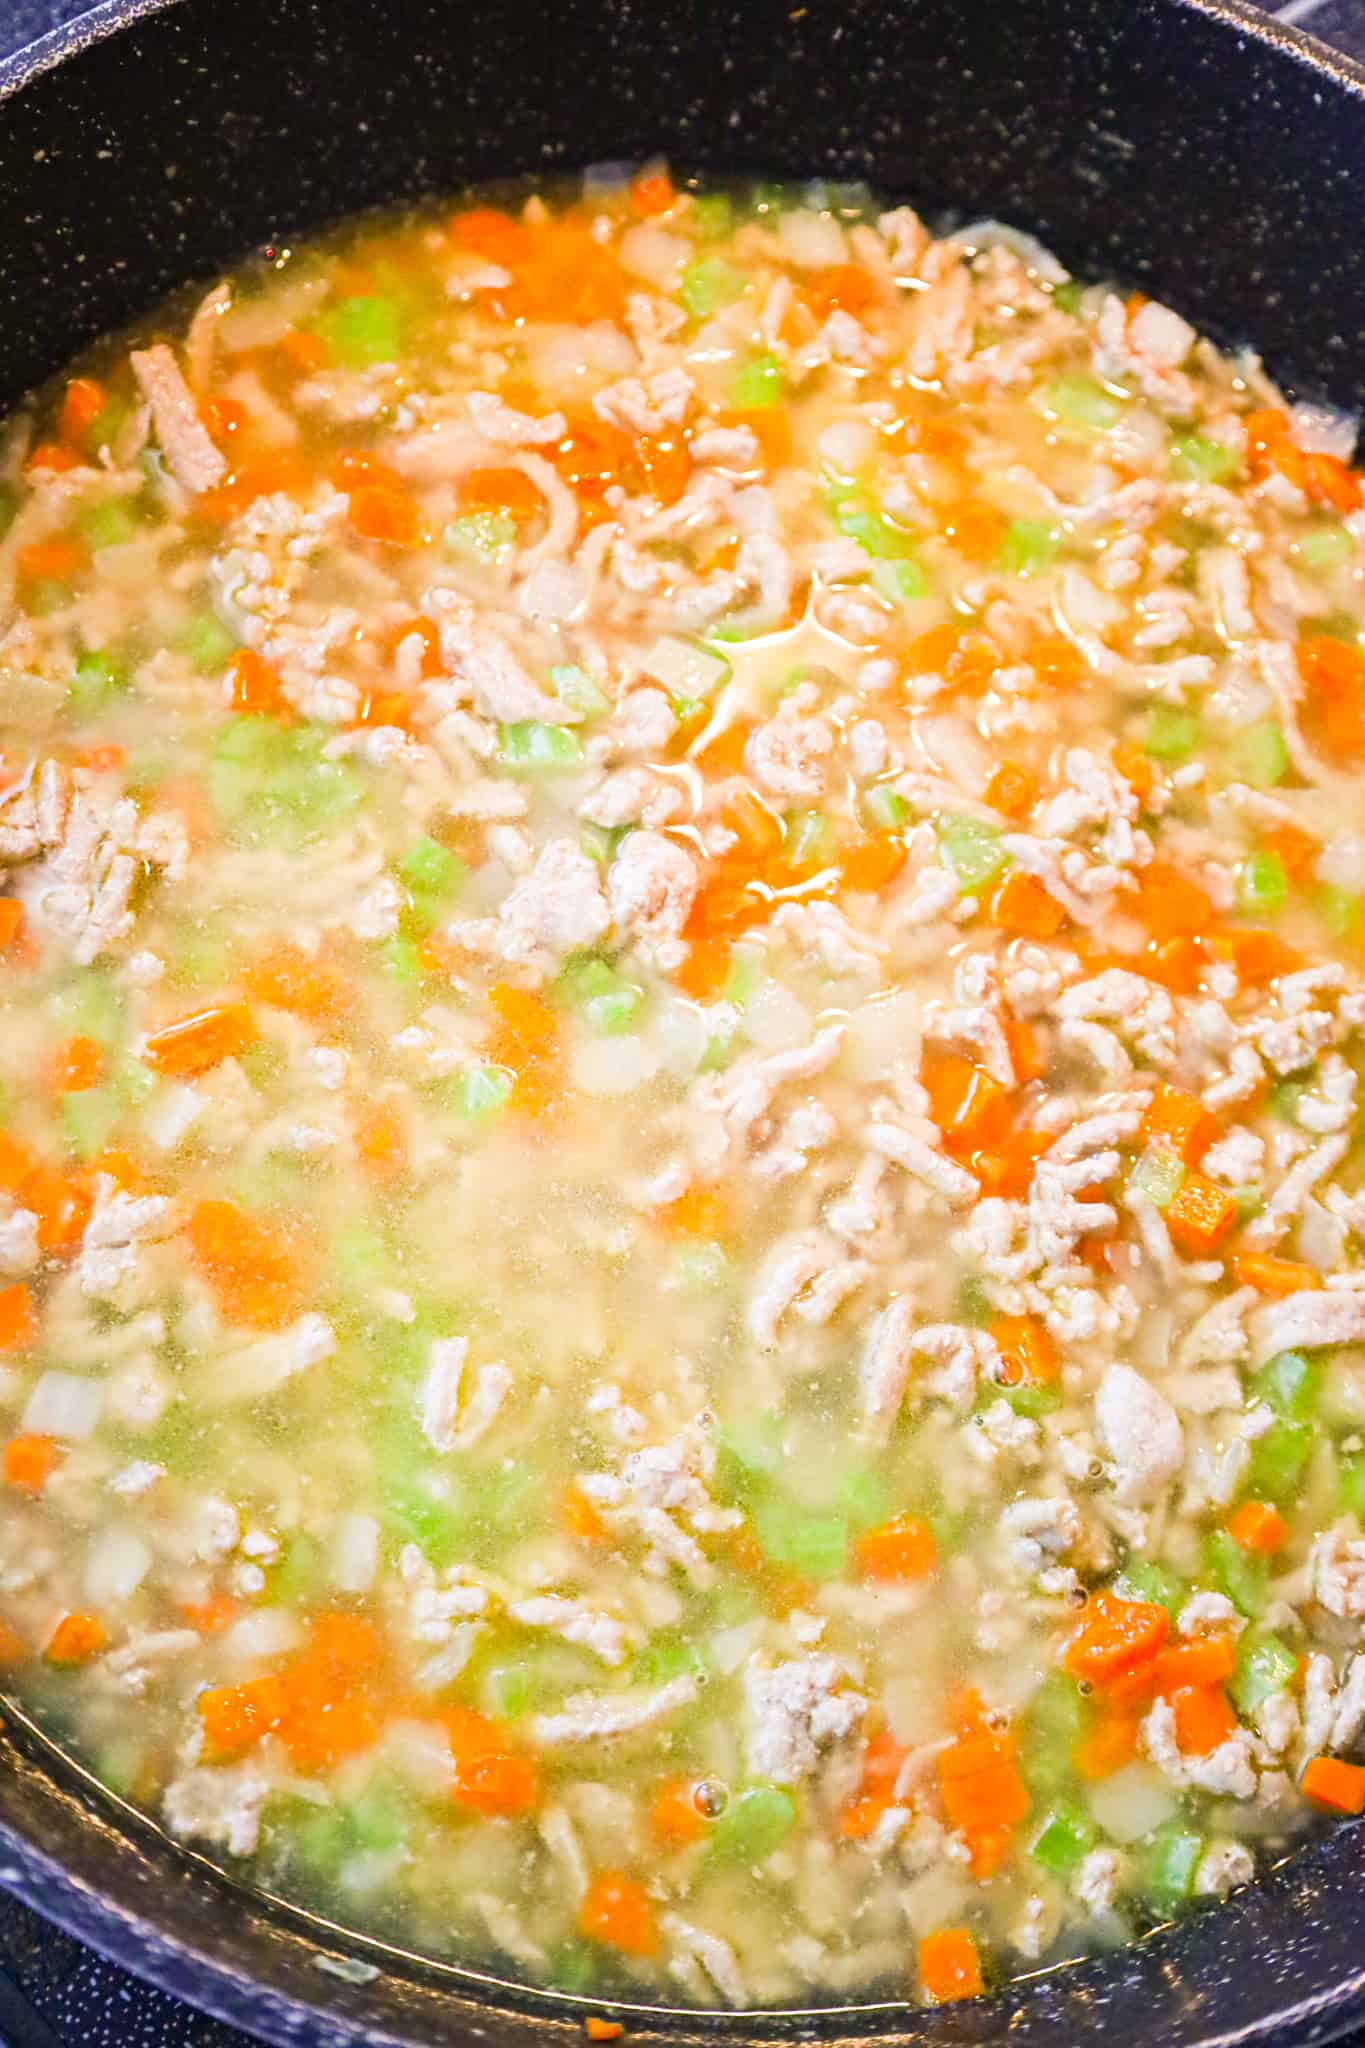 chicken broth and rice added to ground turkey and diced veggies in skillet